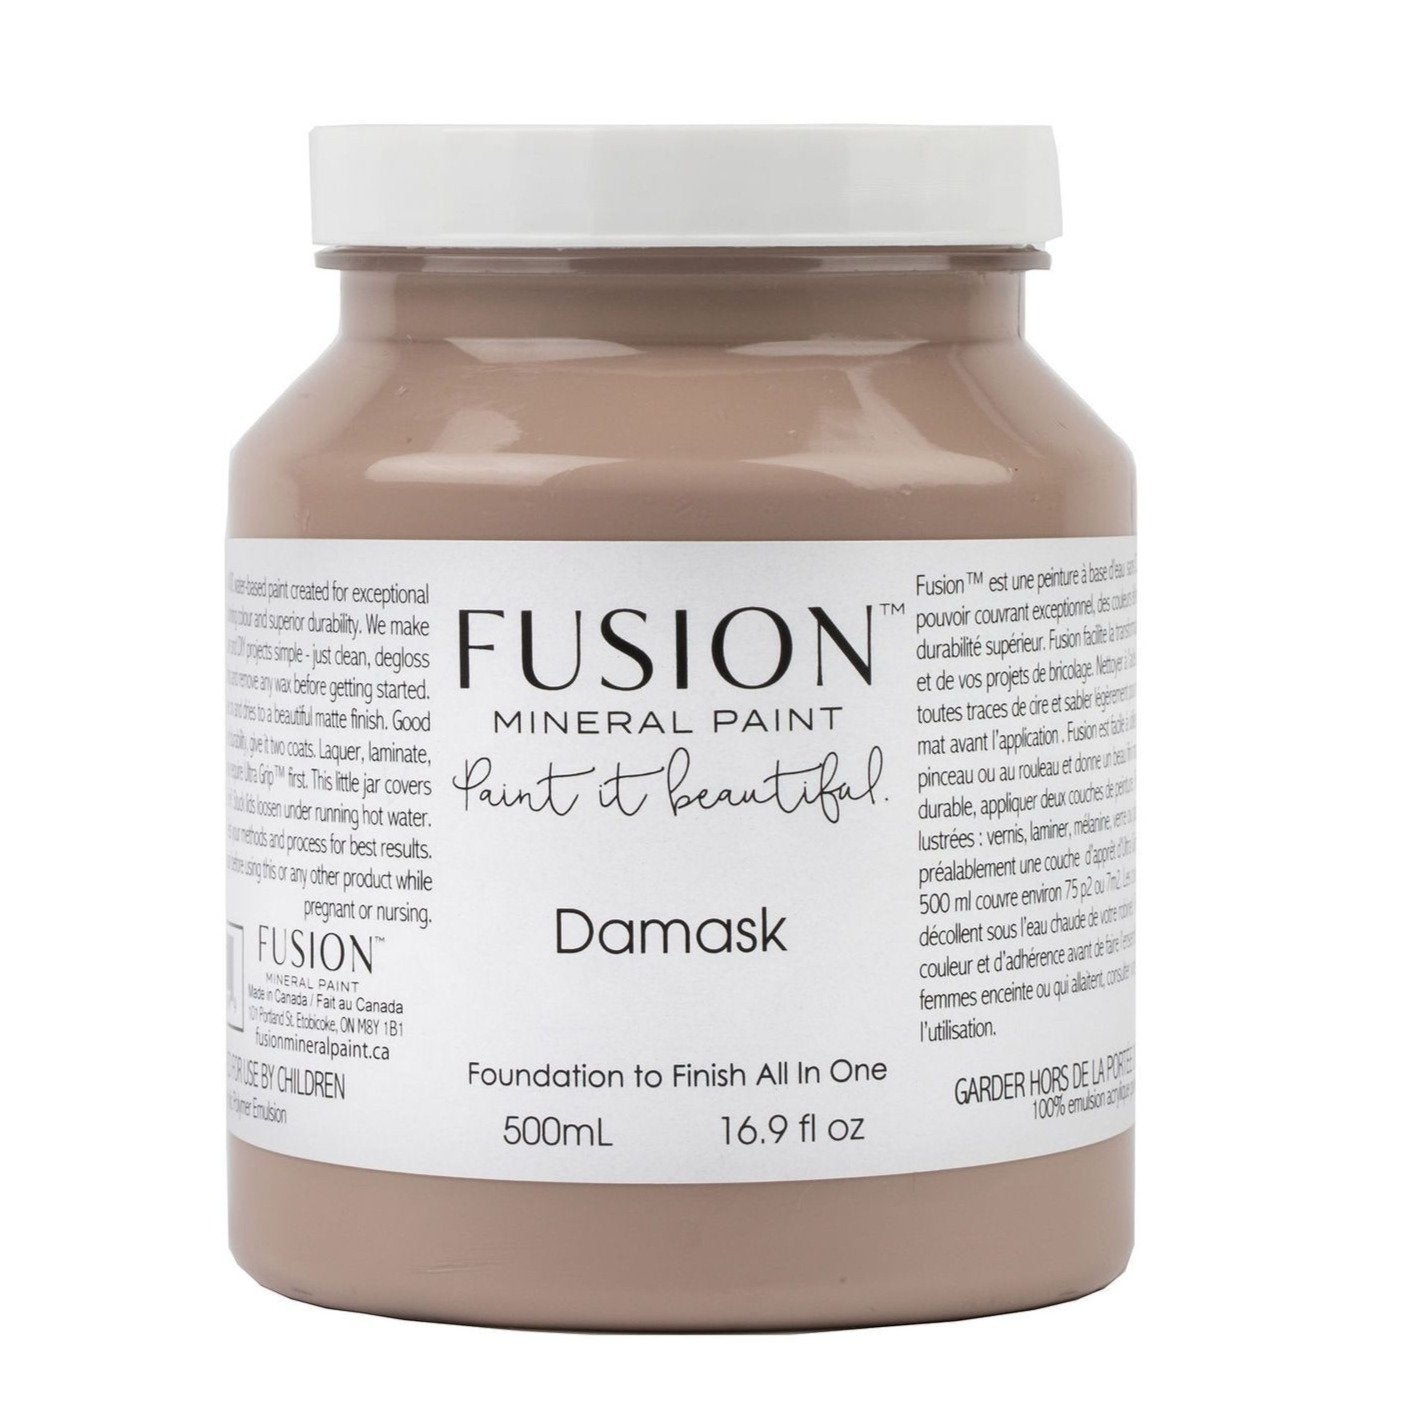 DAMASK - Fusion Mineral Paint - 37ml, 500ml